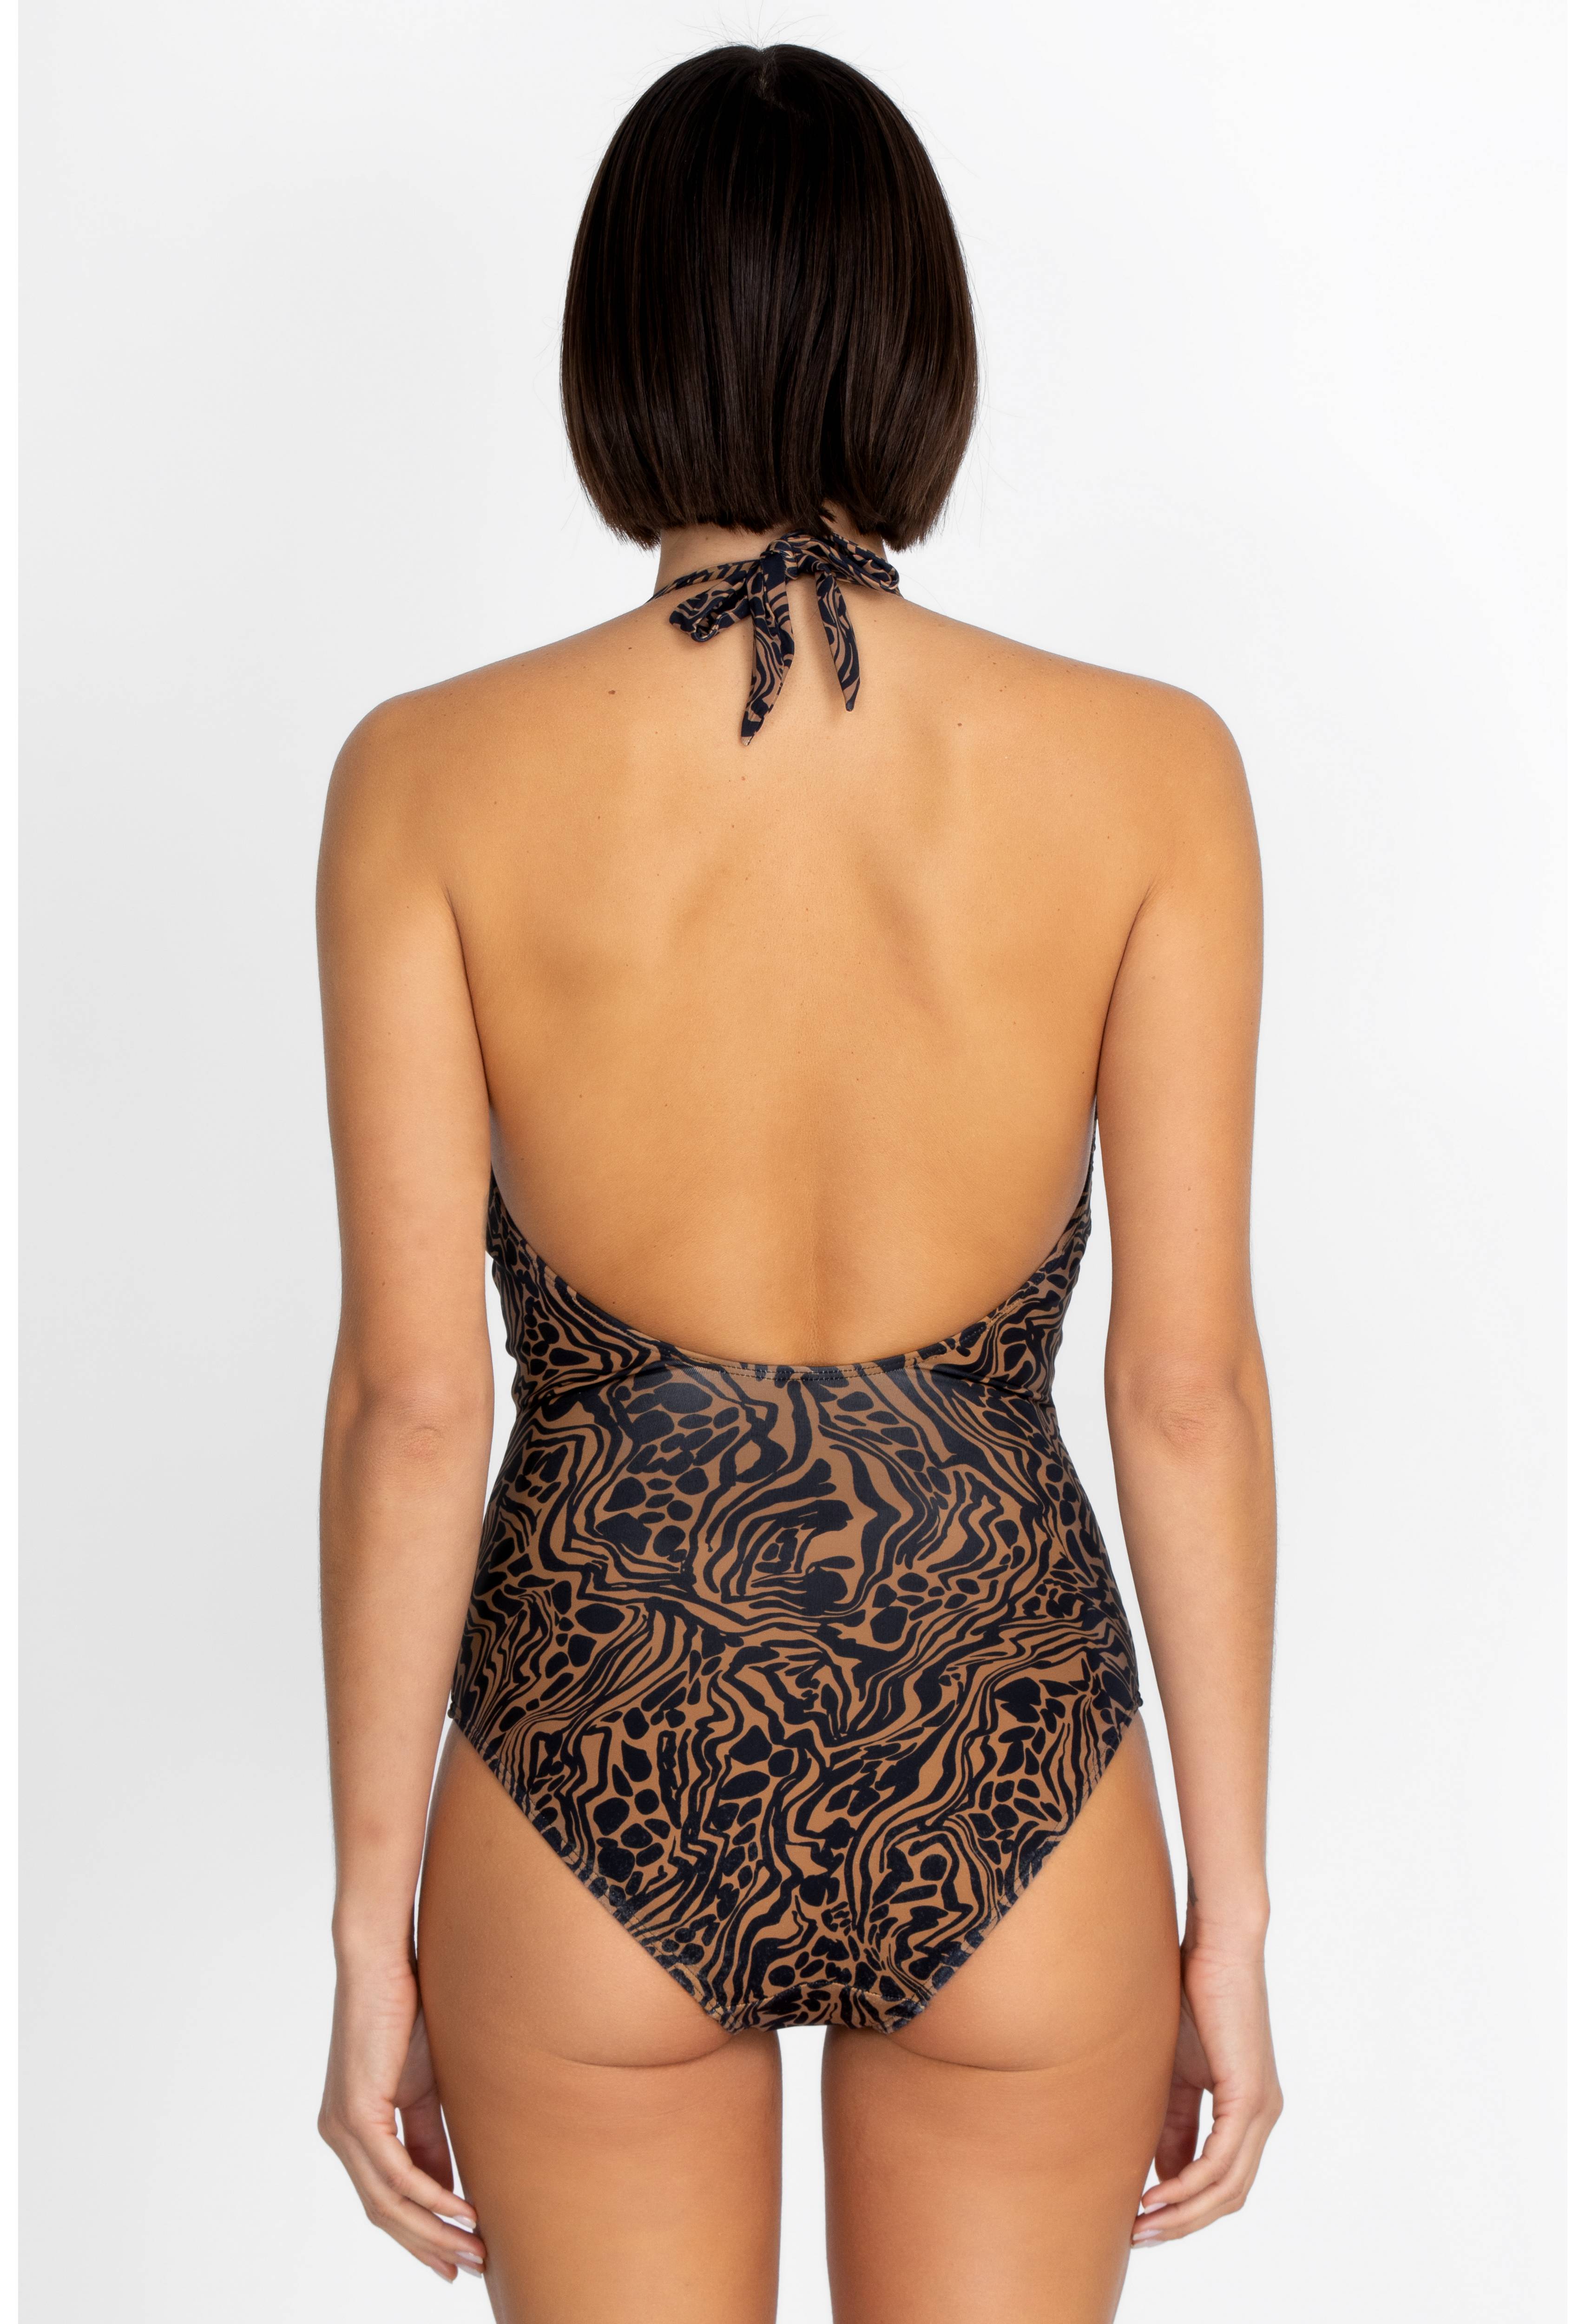 Millo Halter Embroidered One Piece, , large image number 4